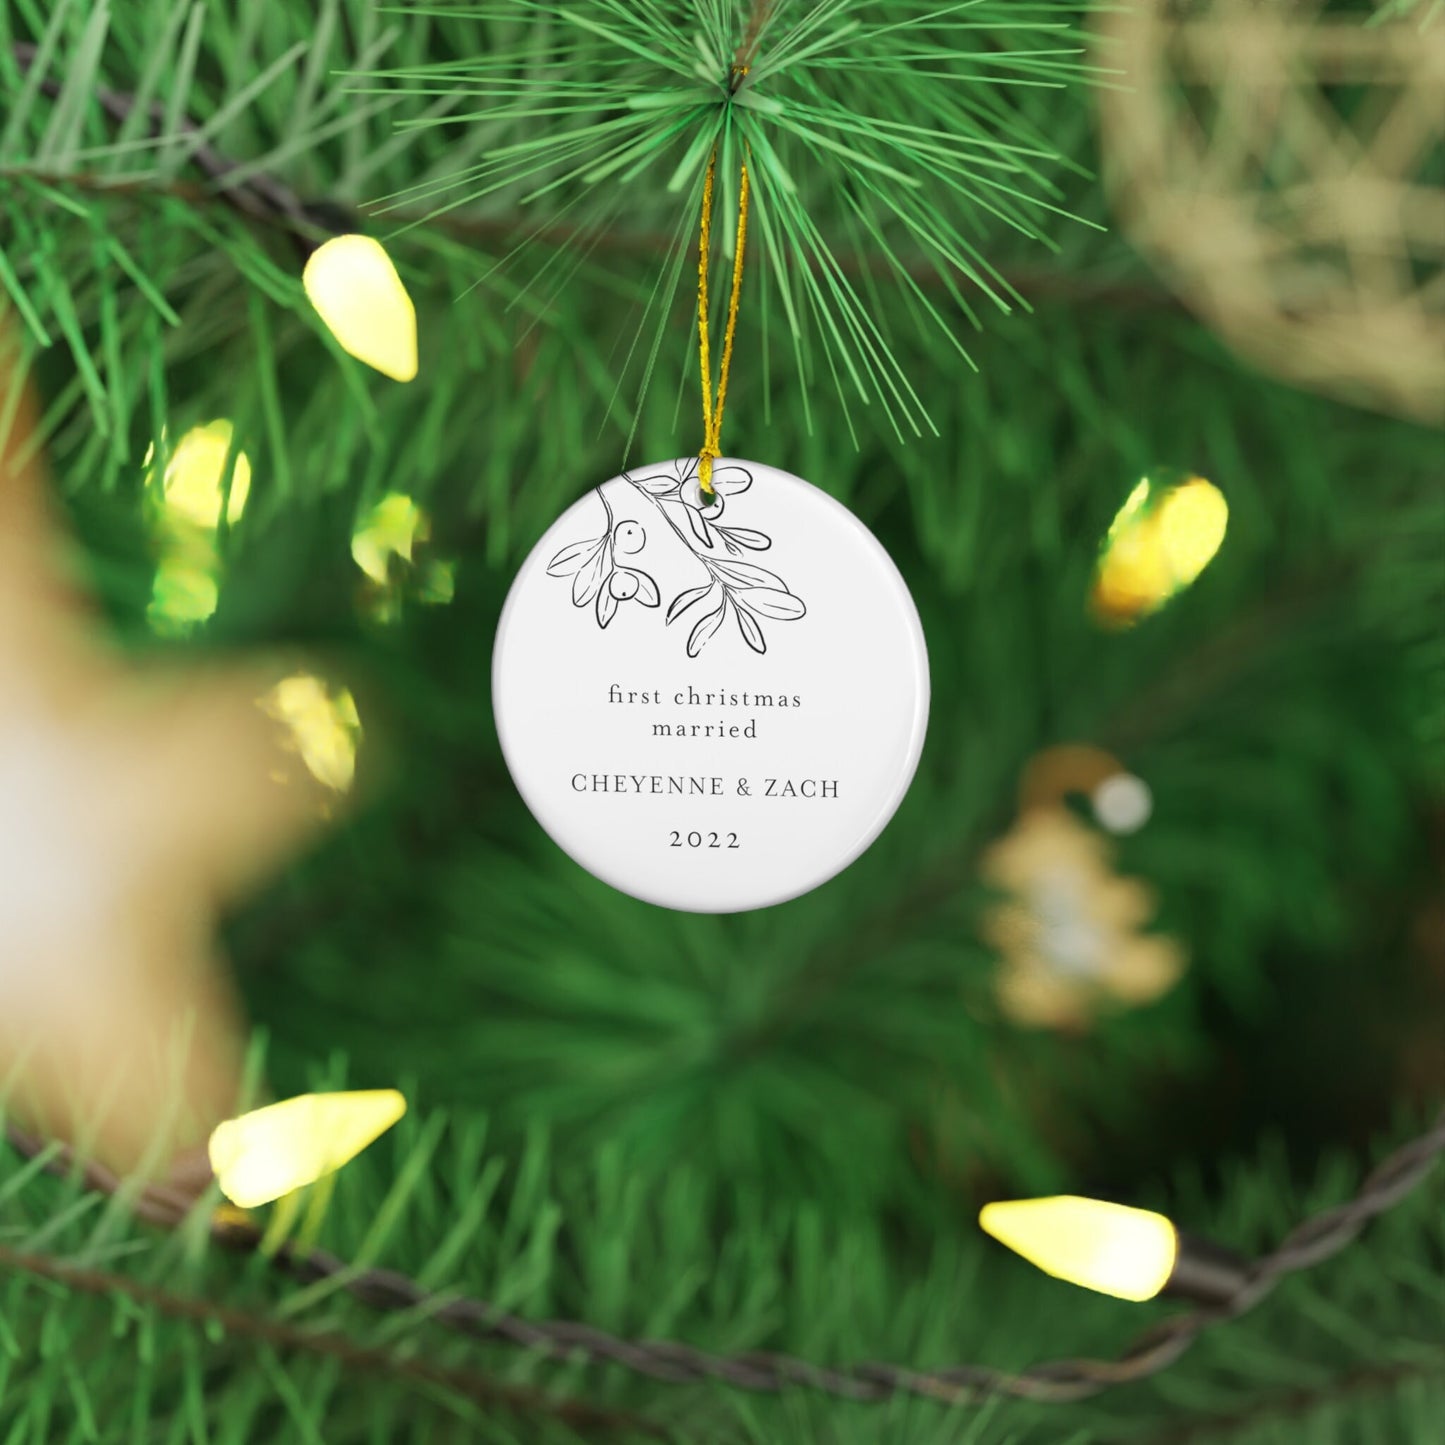 First Christmas Married Ornament 2022, Personalized